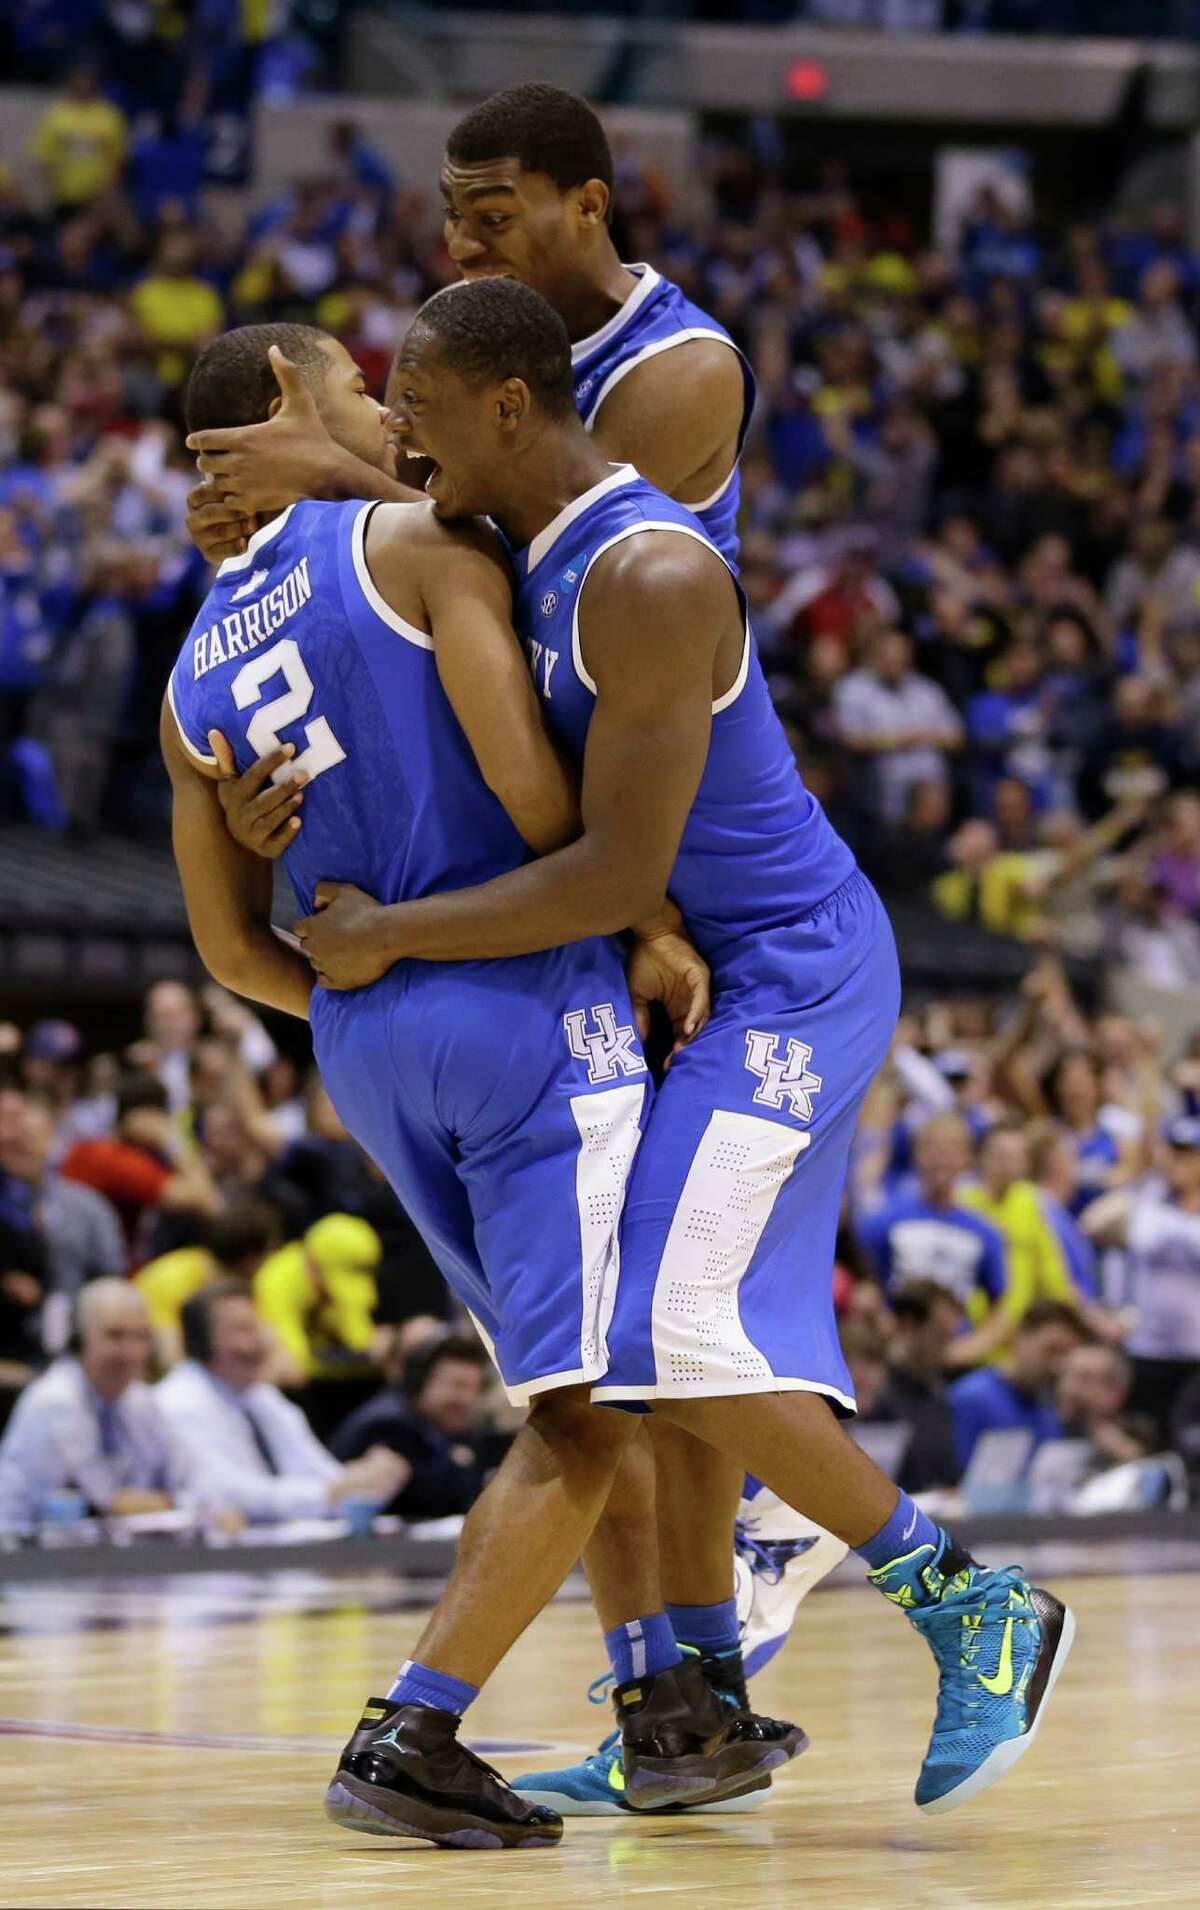 Aaron Harrison, left, keeps his cool, but teammates Julius Randle, top, and Dakari Johnson can't contain themselves after Harrison's game-winning 3-pointer with 2.3 seconds remaining Sunday.